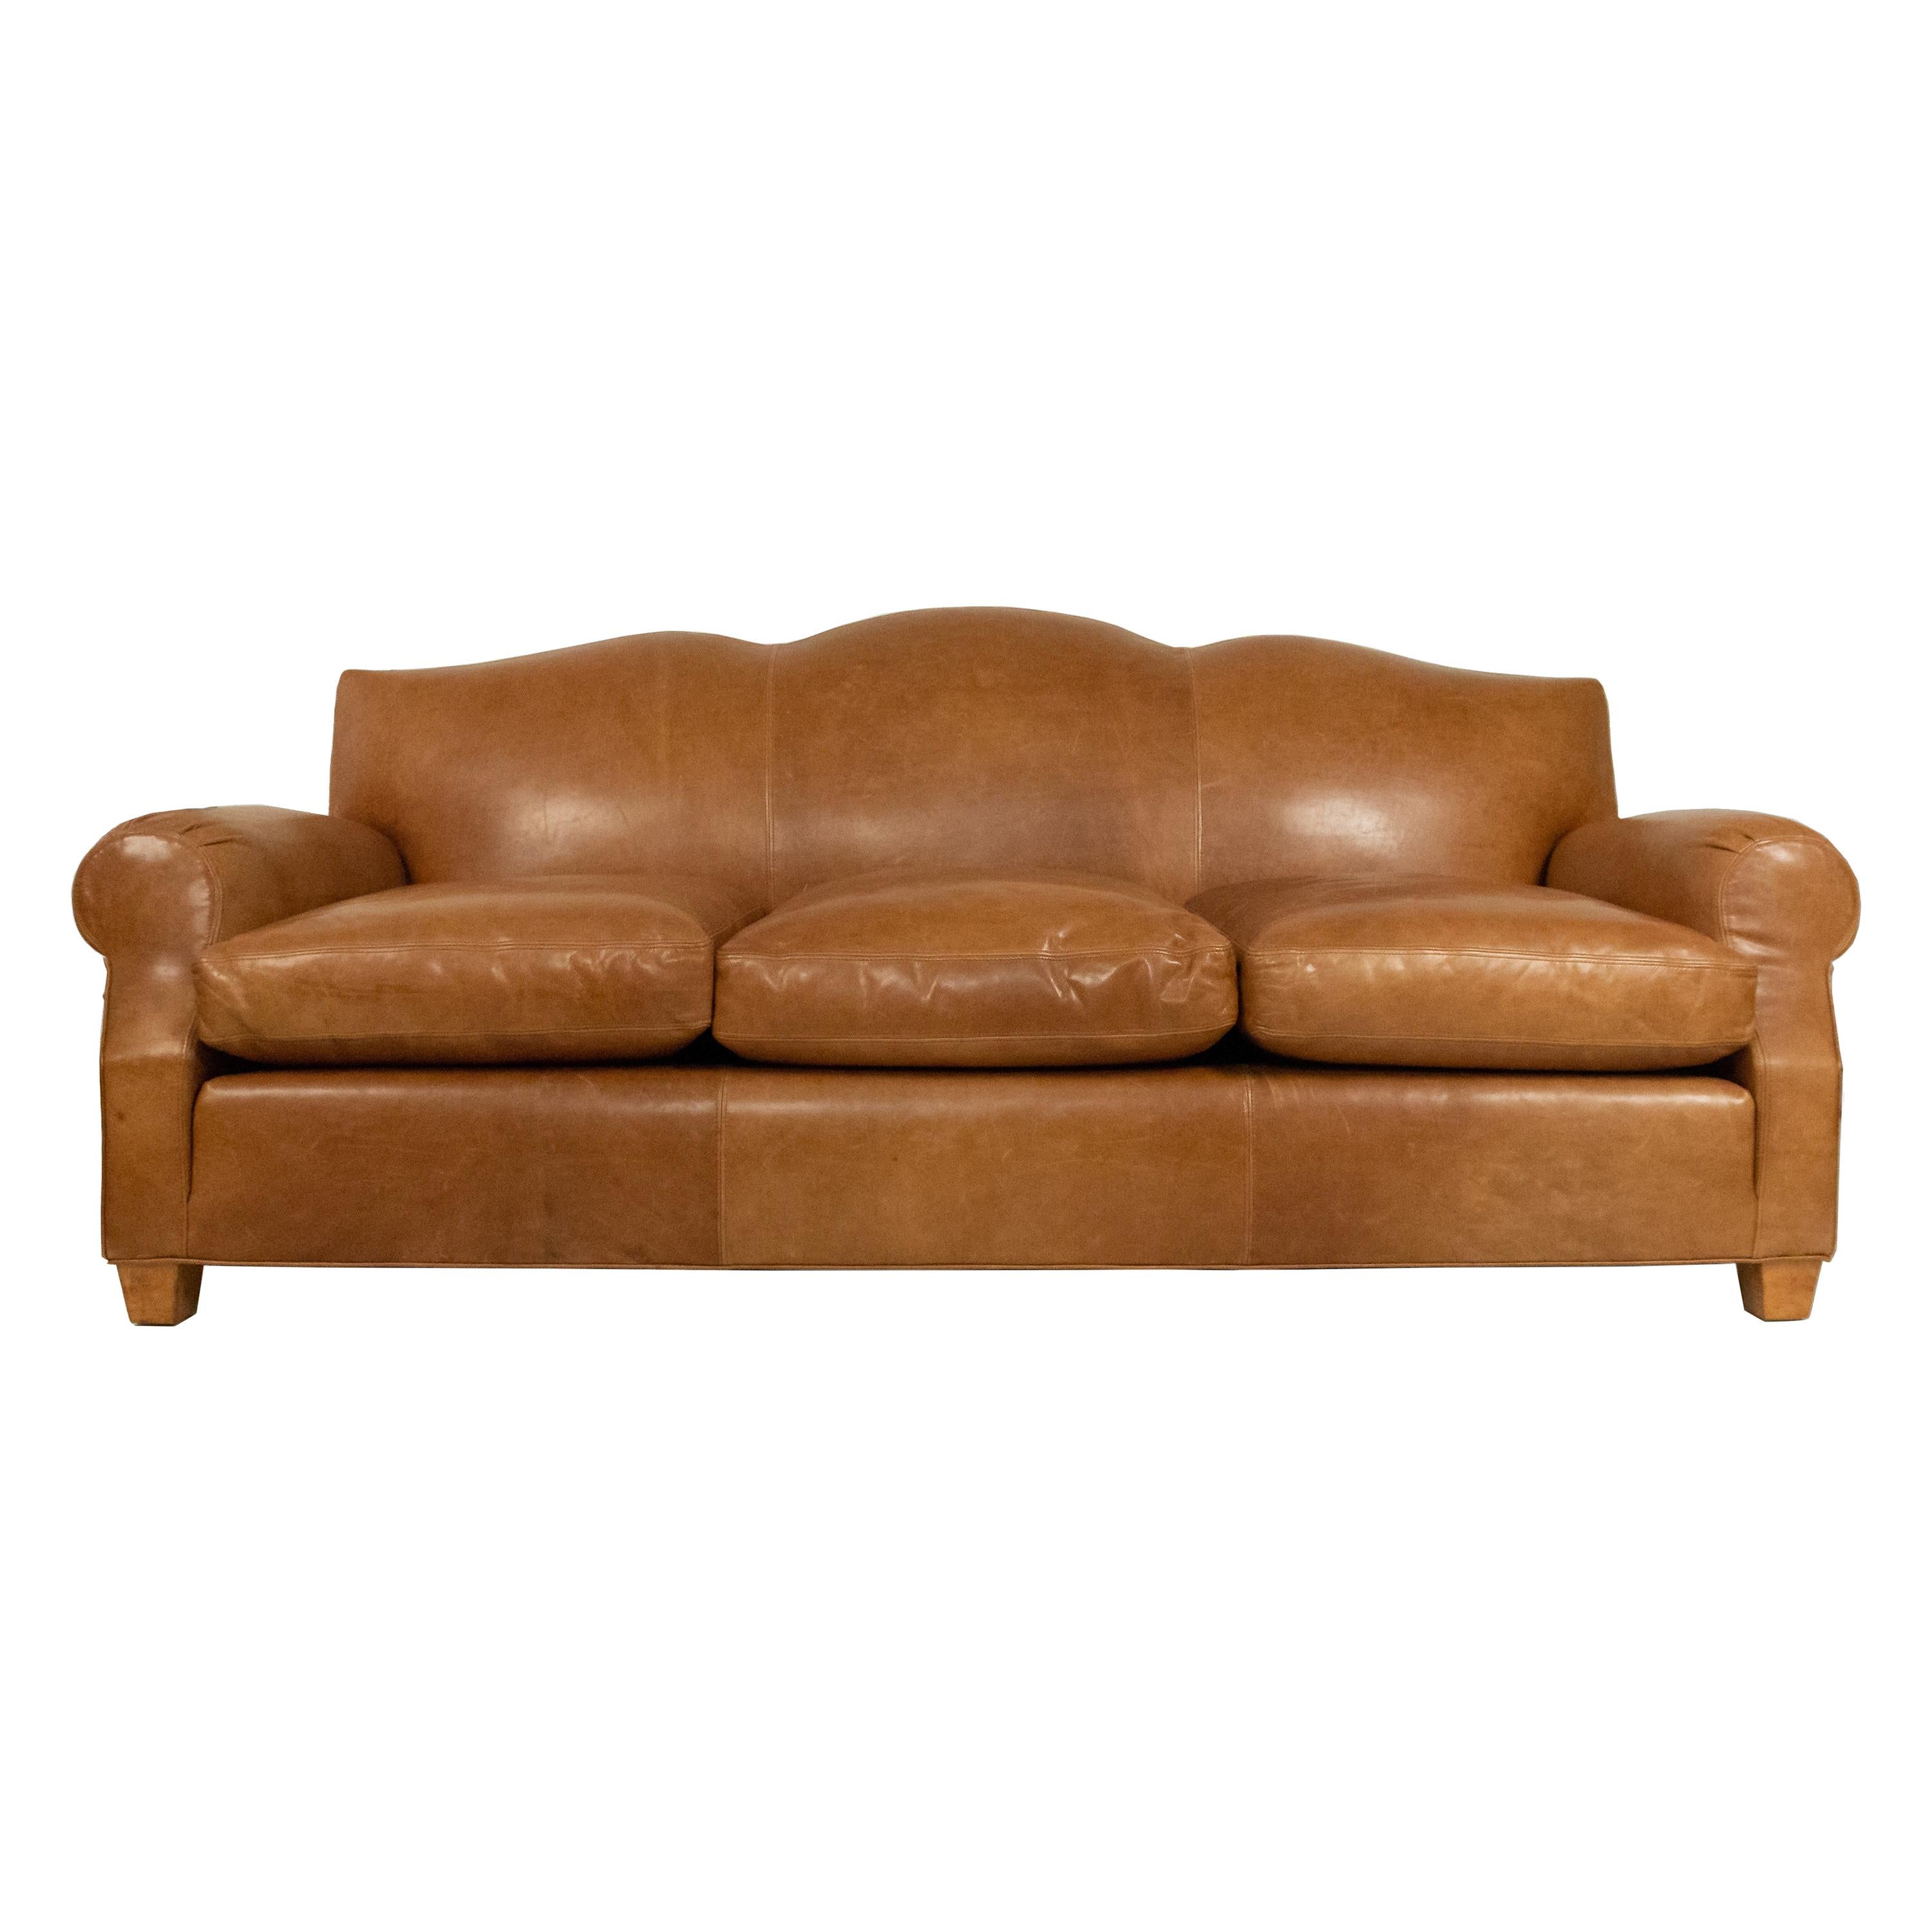 French Art Deco Style Tan Leather Camelback Sofa